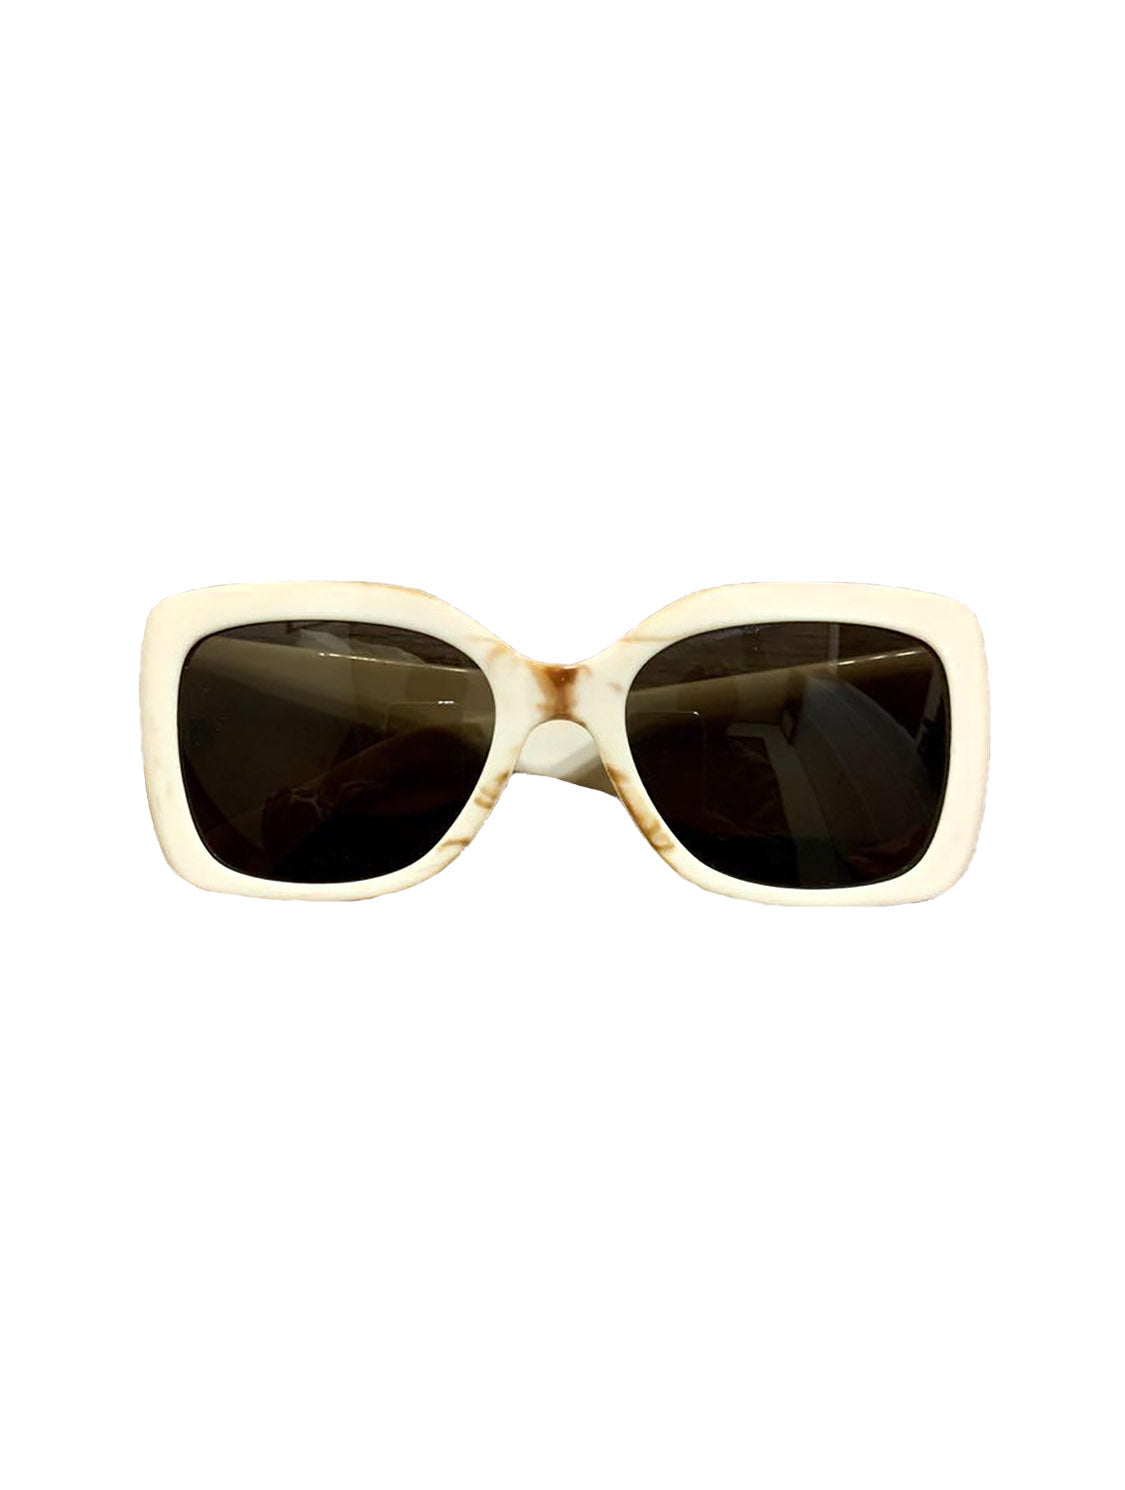 Chanel Black Butterfly White Bow Sunglasses